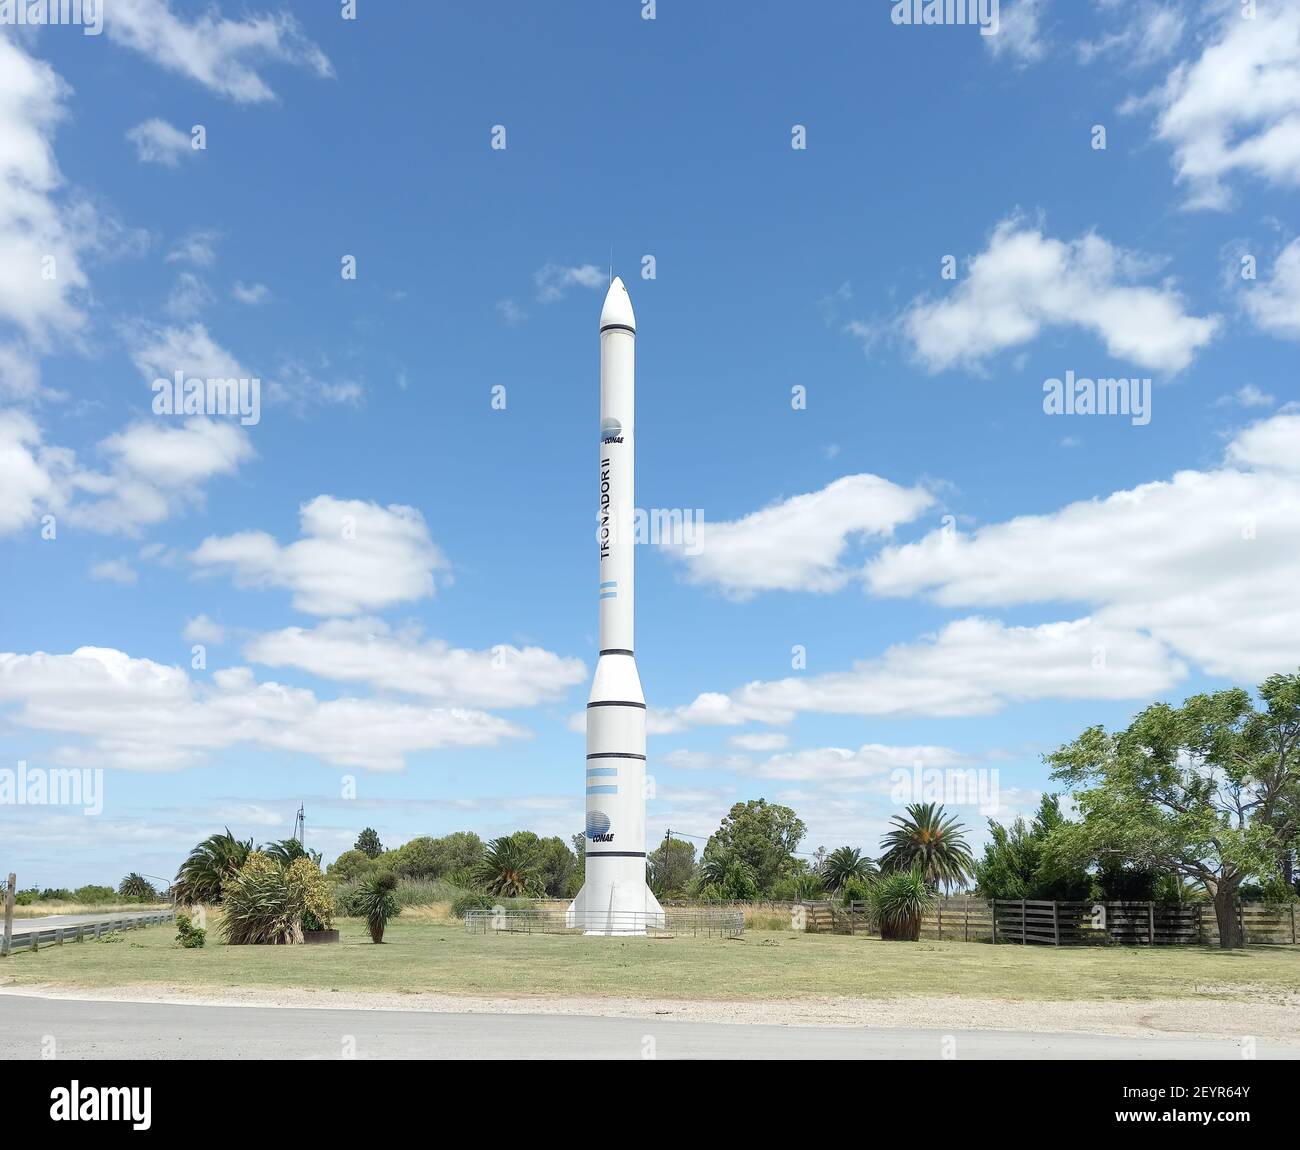 PIPINAS, PUNTA INDIO, BUENOS AIRES, ARGENTINA - Jan 18, 2021: The replica of the Tronador II space launcher designed to place satellites into orbit  f Stock Photo